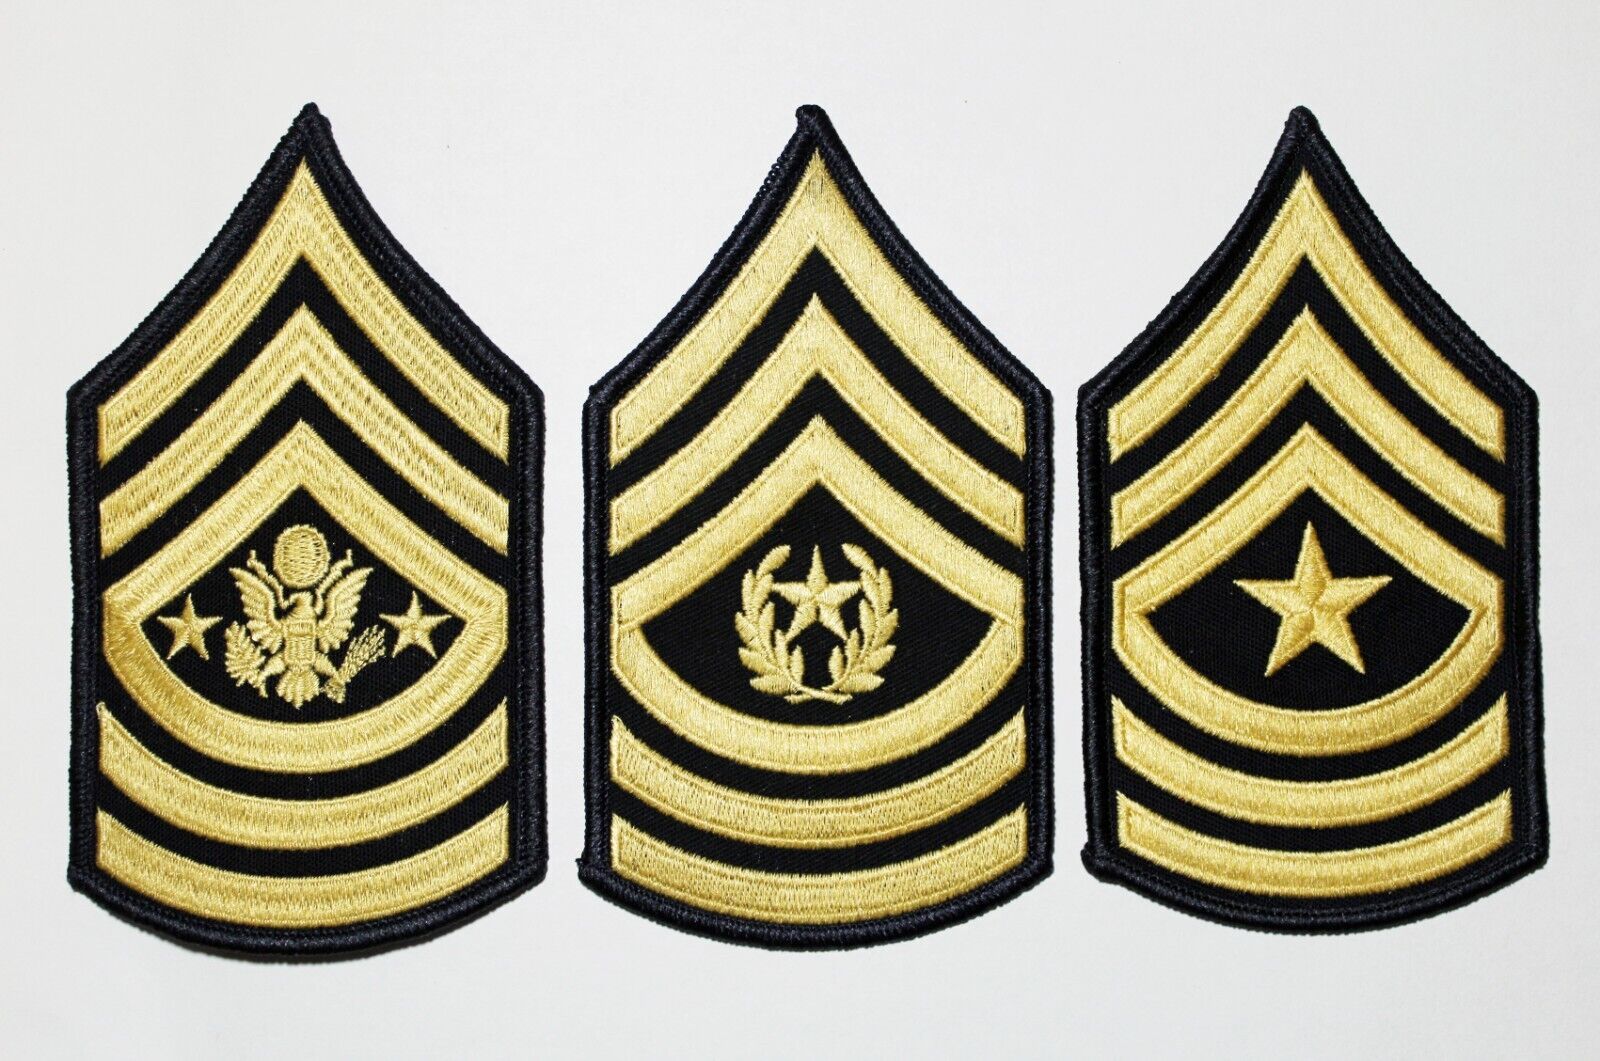 3 PAIR  Army Leadership Sergeant Major Rank Gold on Blue Chevron Patches - Male